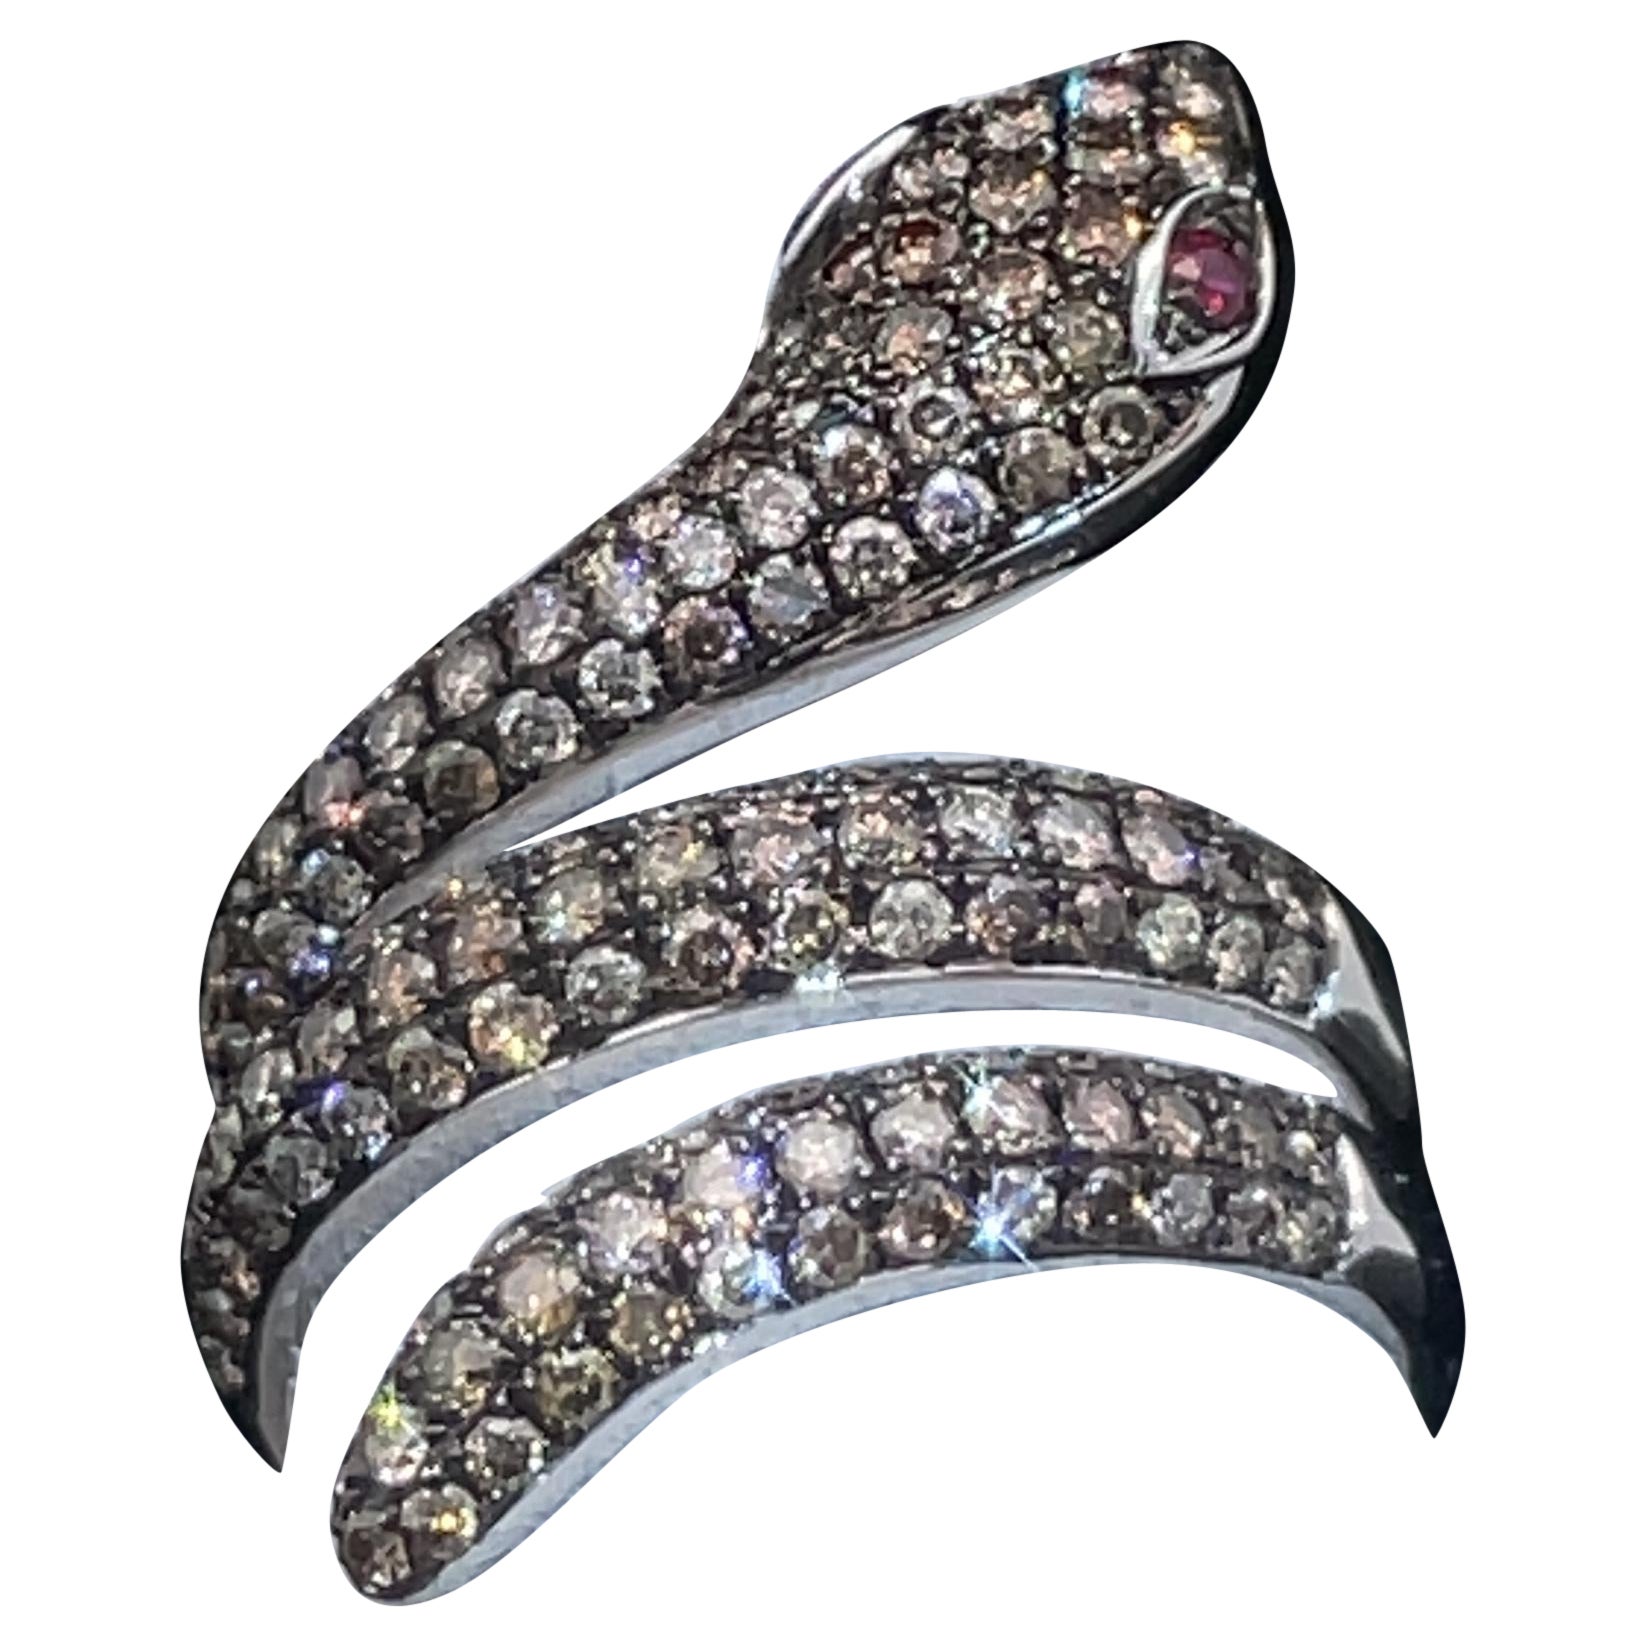 1.50 Carat Fancy Brown Chocolate Diamond Pave Serpent Ring in 18k Gold w/ Tag